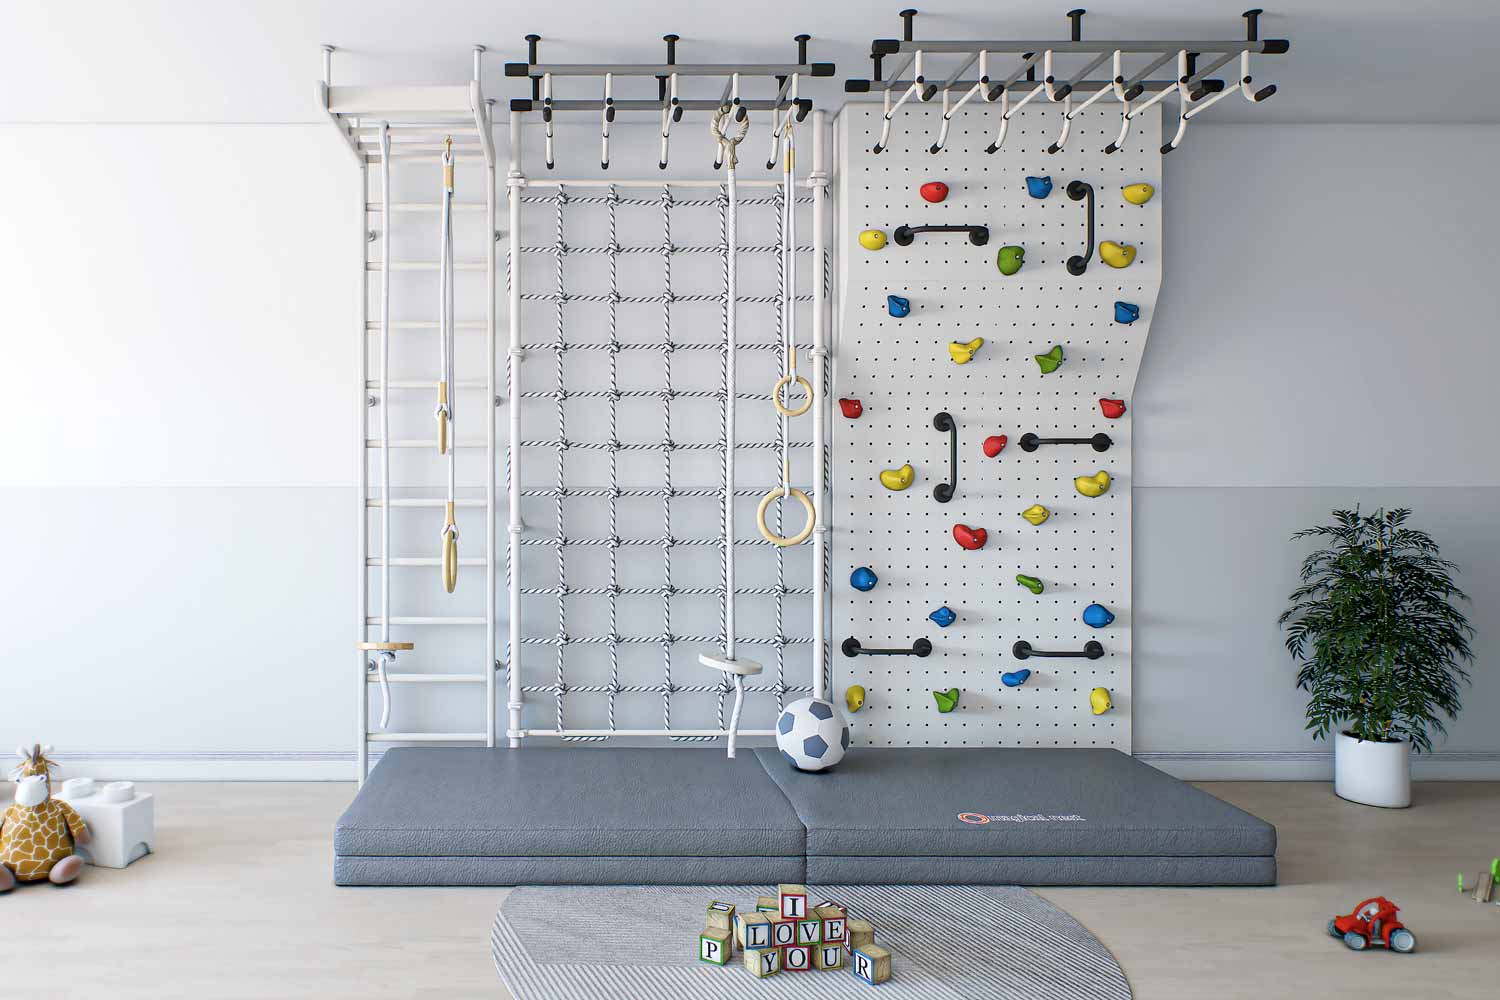 Child's indoor playground with a climbing rope, wall bars, gymnastic rings, colorful rock climbing holds, and a soft landing mat for safety.